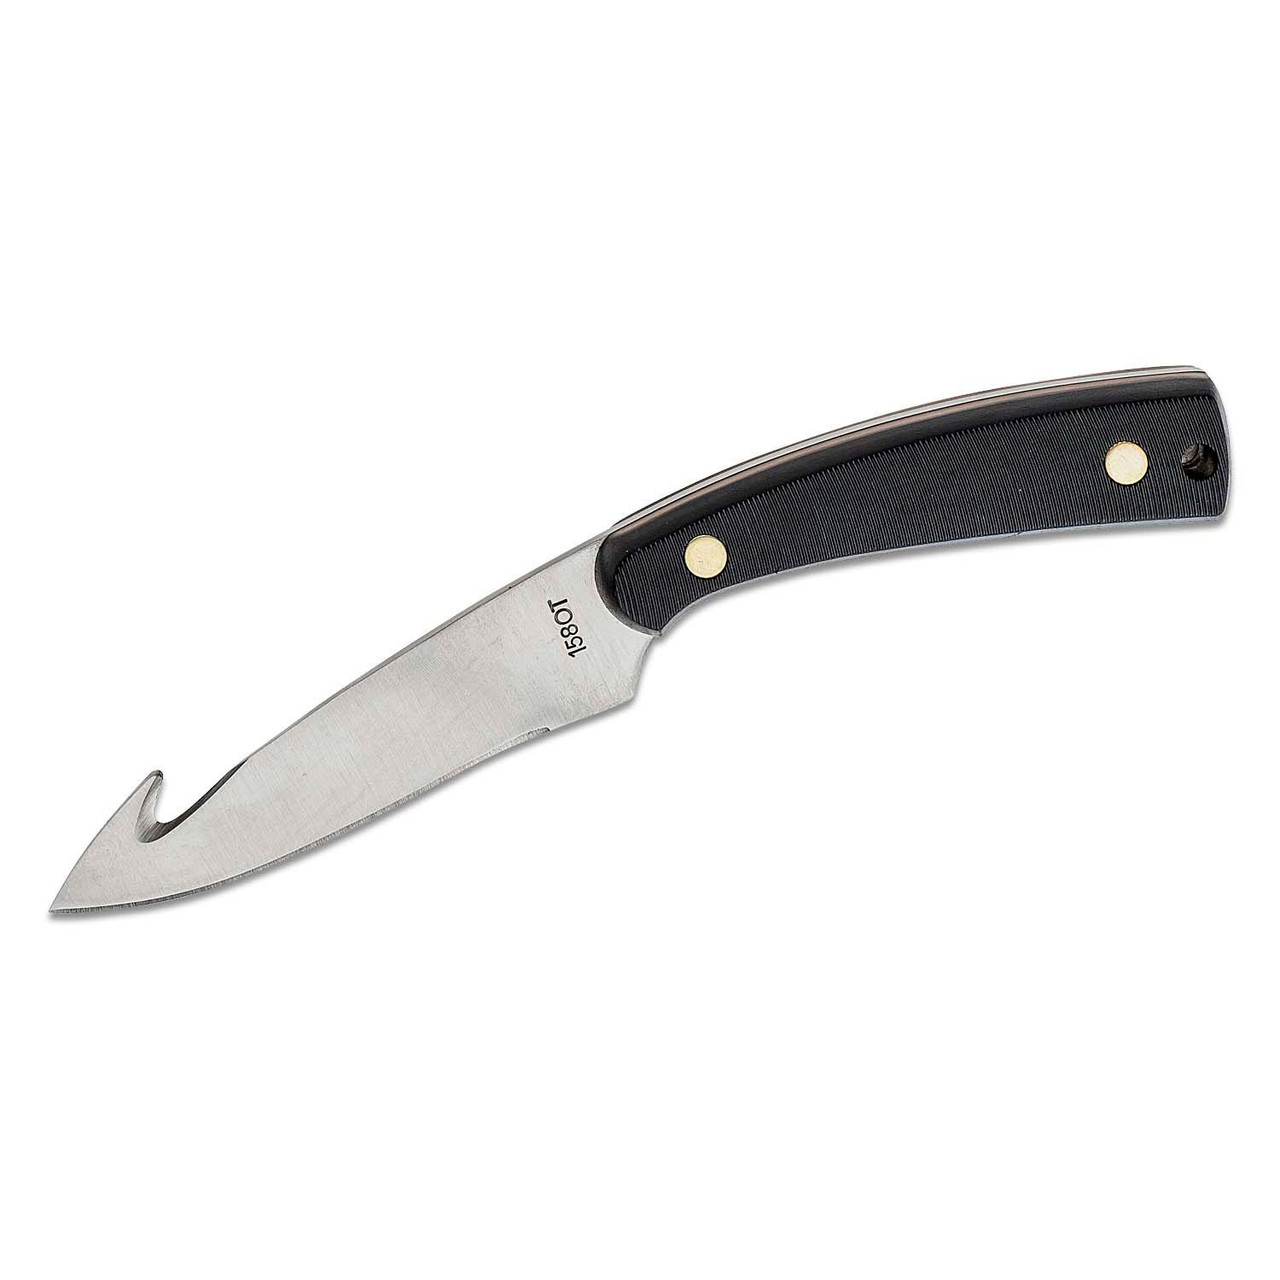 Old Timer Guthook Skinner Fixed 3.75 in Blade Polymer Handle